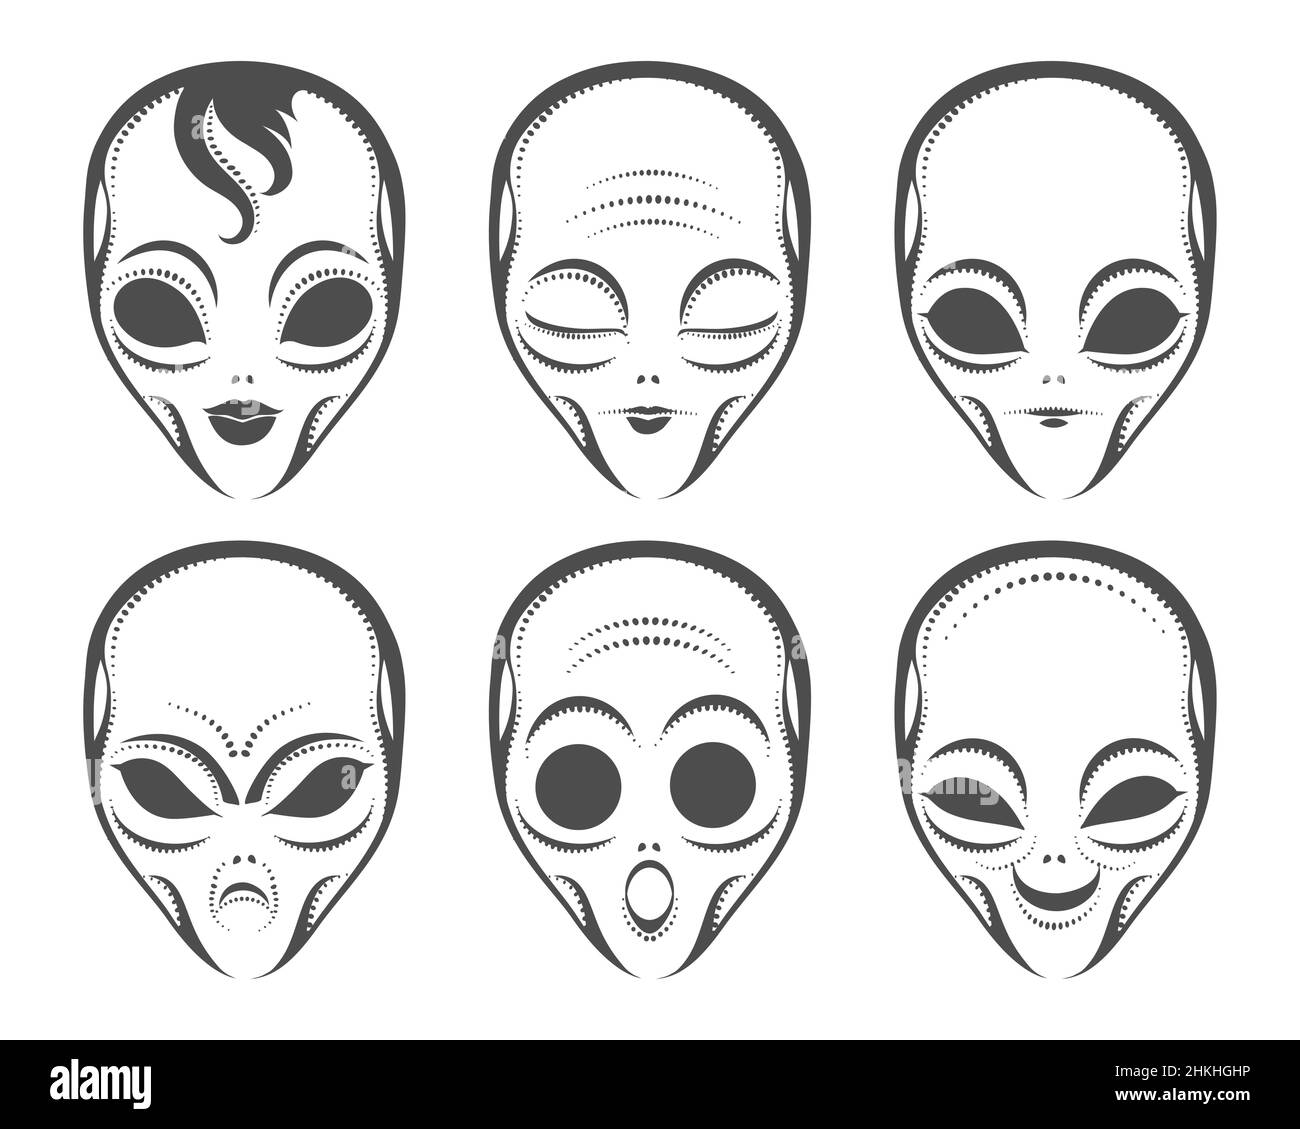 Set of Humanoid Alien Face Different Expression.  Alien anger smile serenity calm surprise emotion isolated on white. Vector illustration. Stock Vector